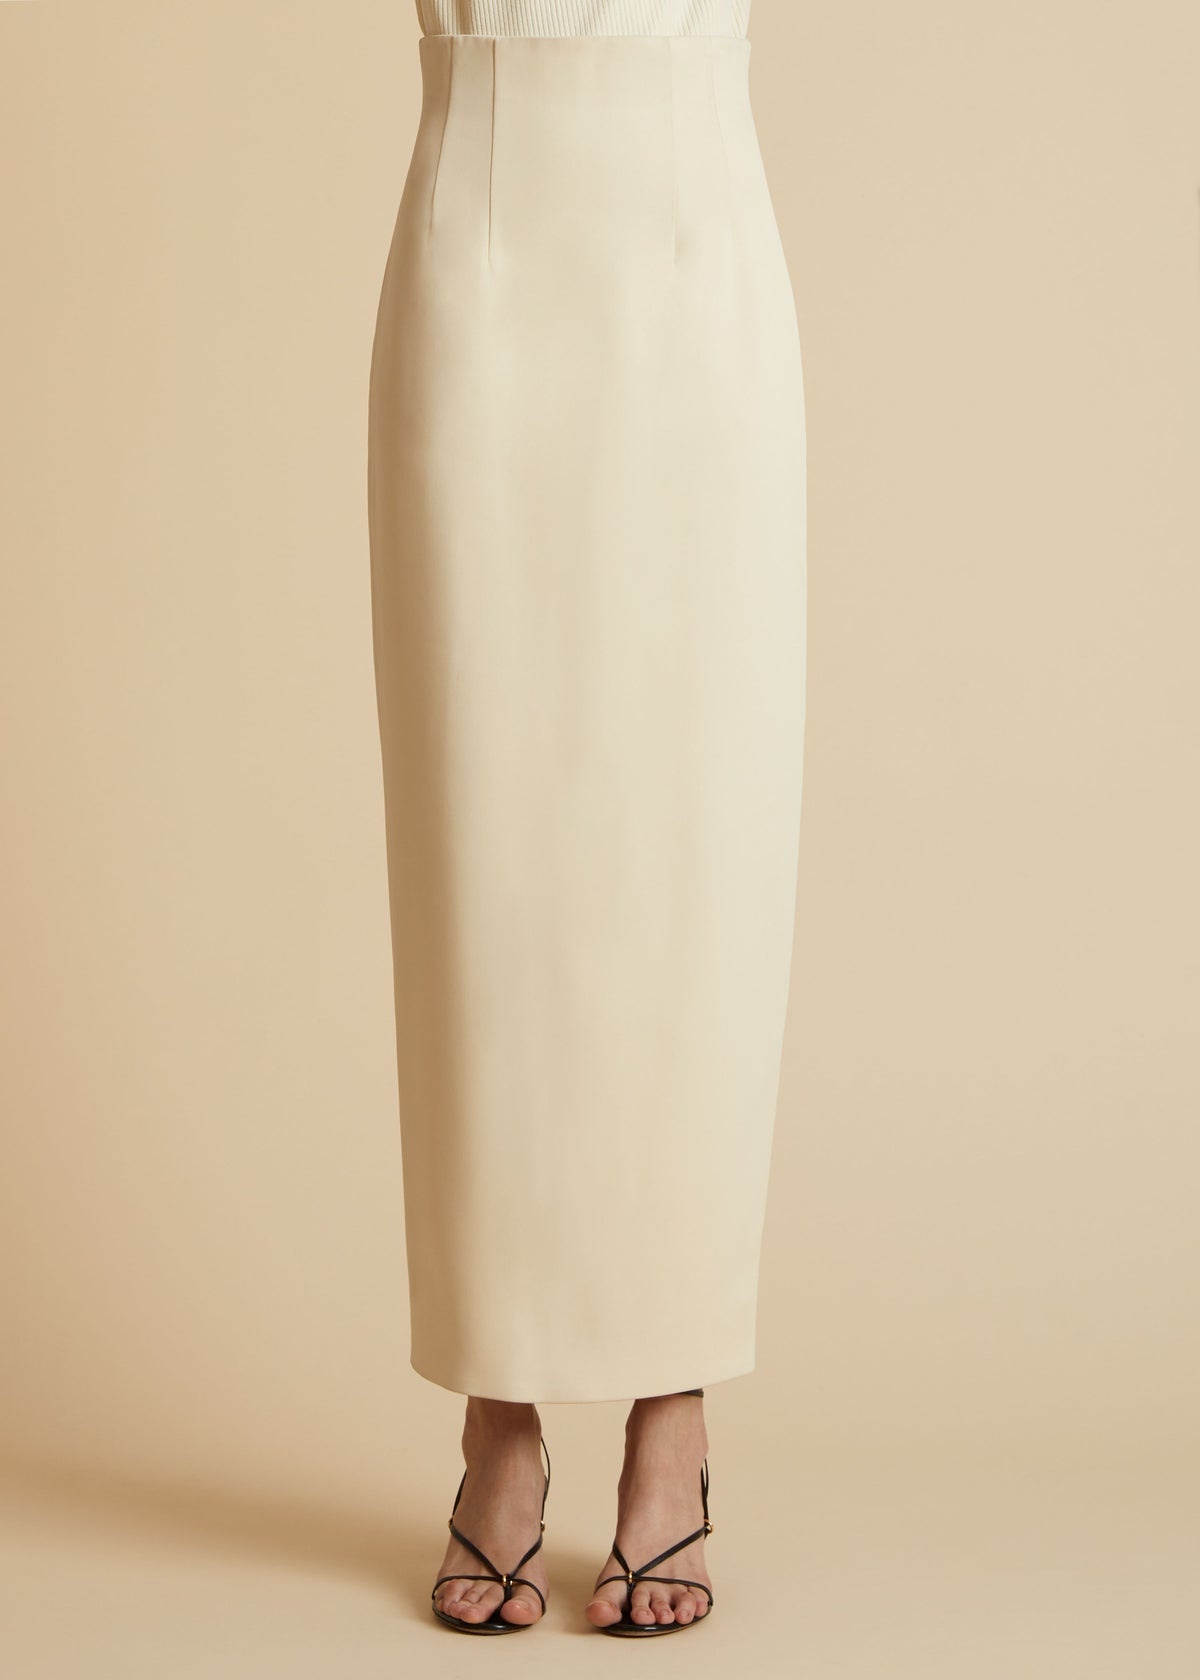 The Loxley Skirt in Bone - 2